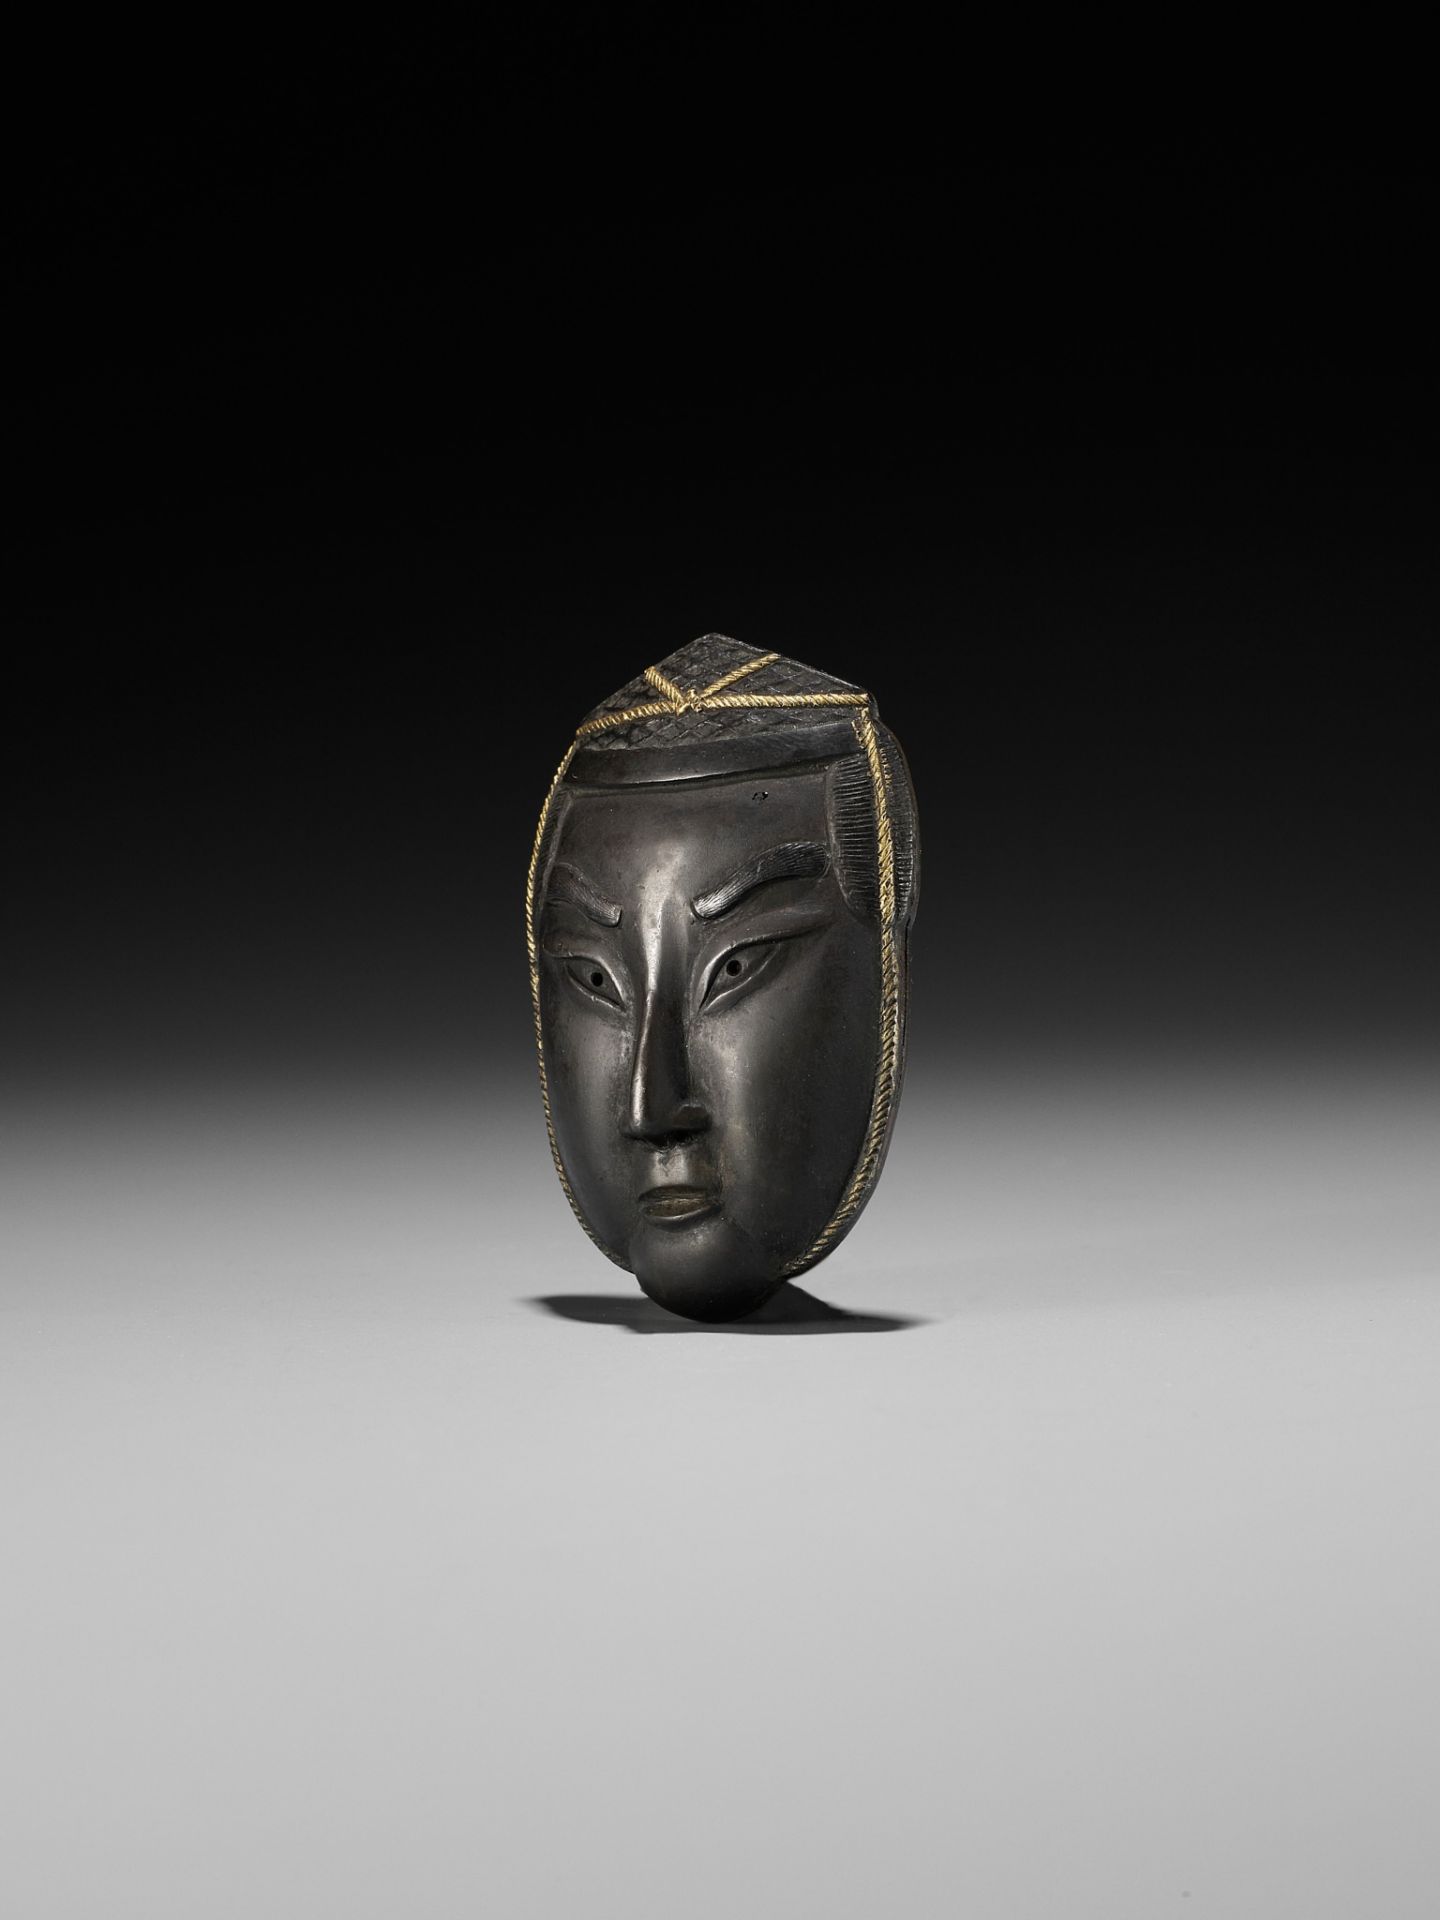 A RARE MIXED METAL NETSUKE DEPICTING THE HEAD OF A NOBLEMAN - Image 2 of 9